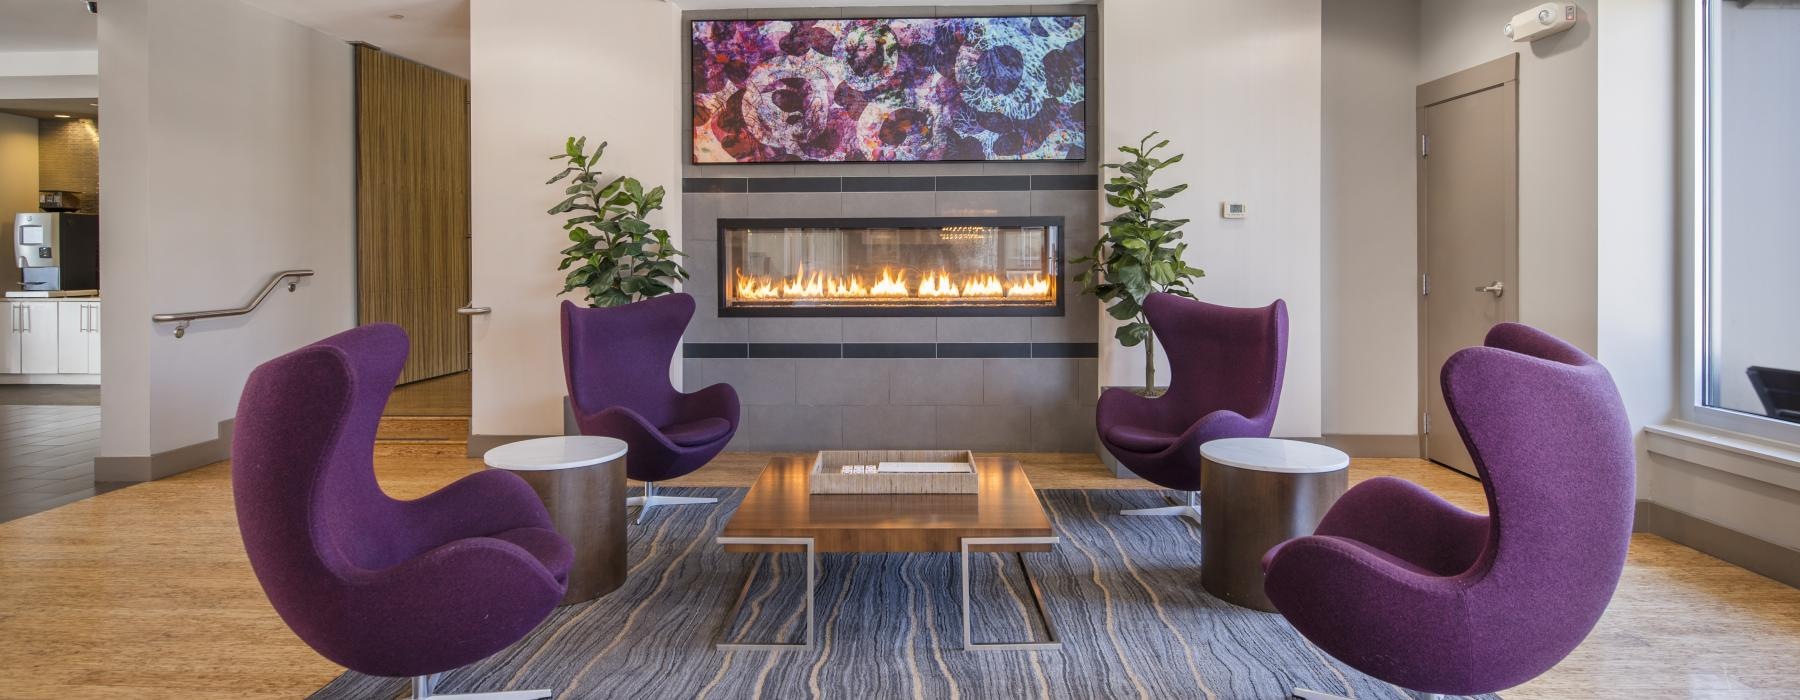 a room with purple chairs and a fireplace